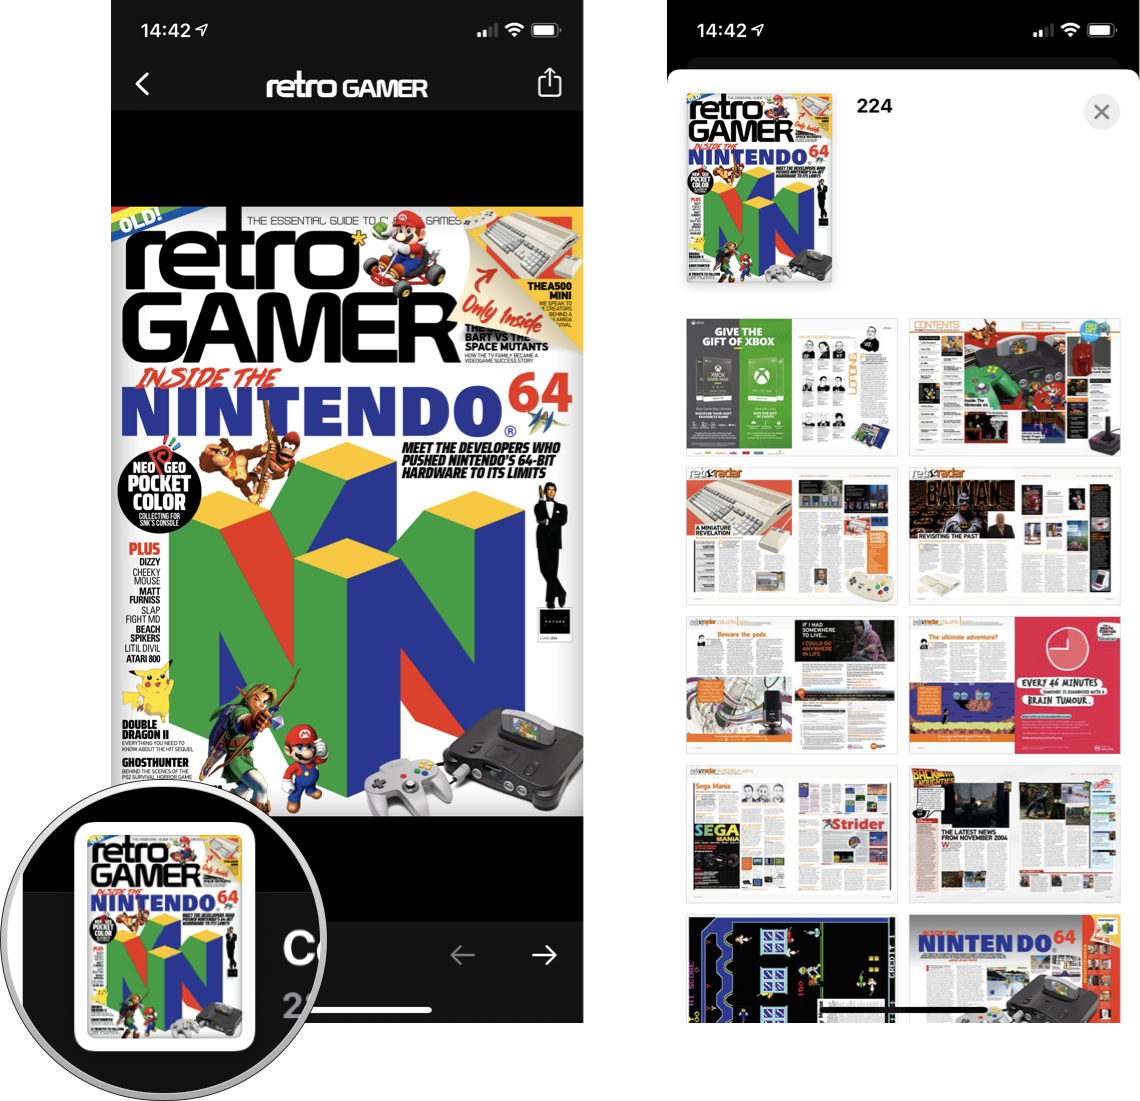 How to read an article in PDF magazine: Open a magazine, tap its cover thumbnail, select the page you wish to view